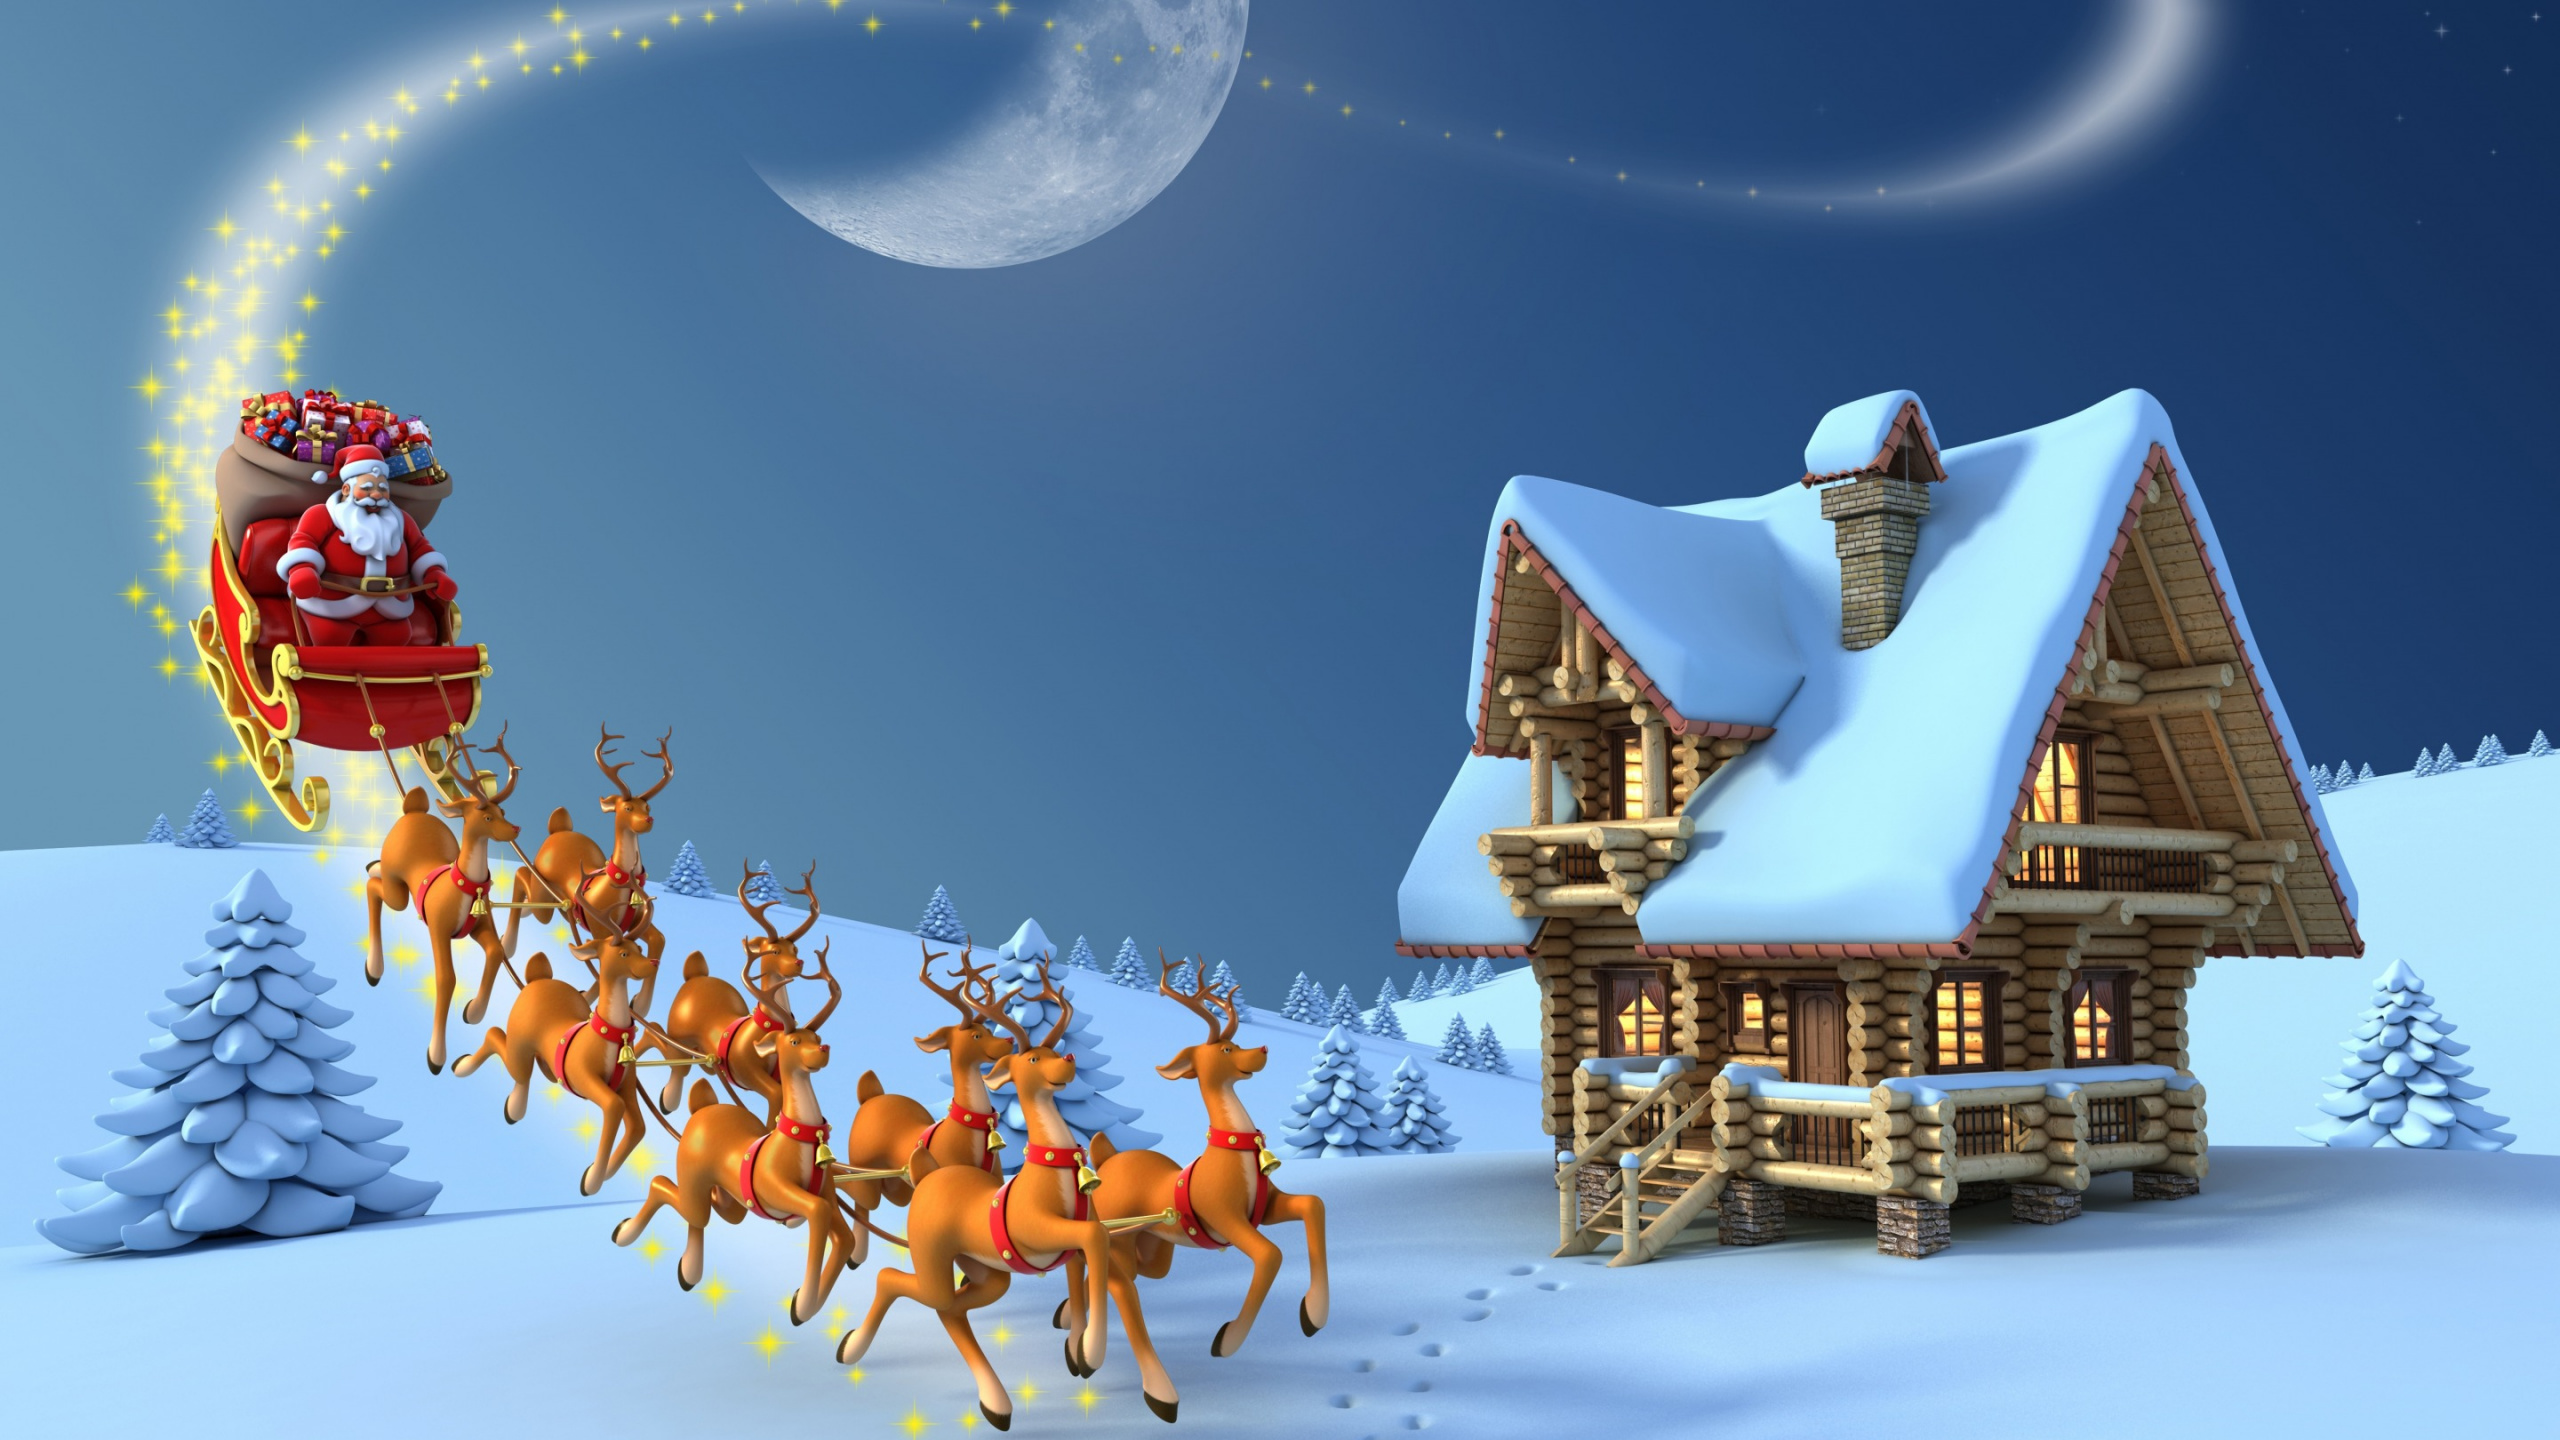 Reindeer, Santa Claus, Christmas Day, Snow, Sled. Wallpaper in 2560x1440 Resolution